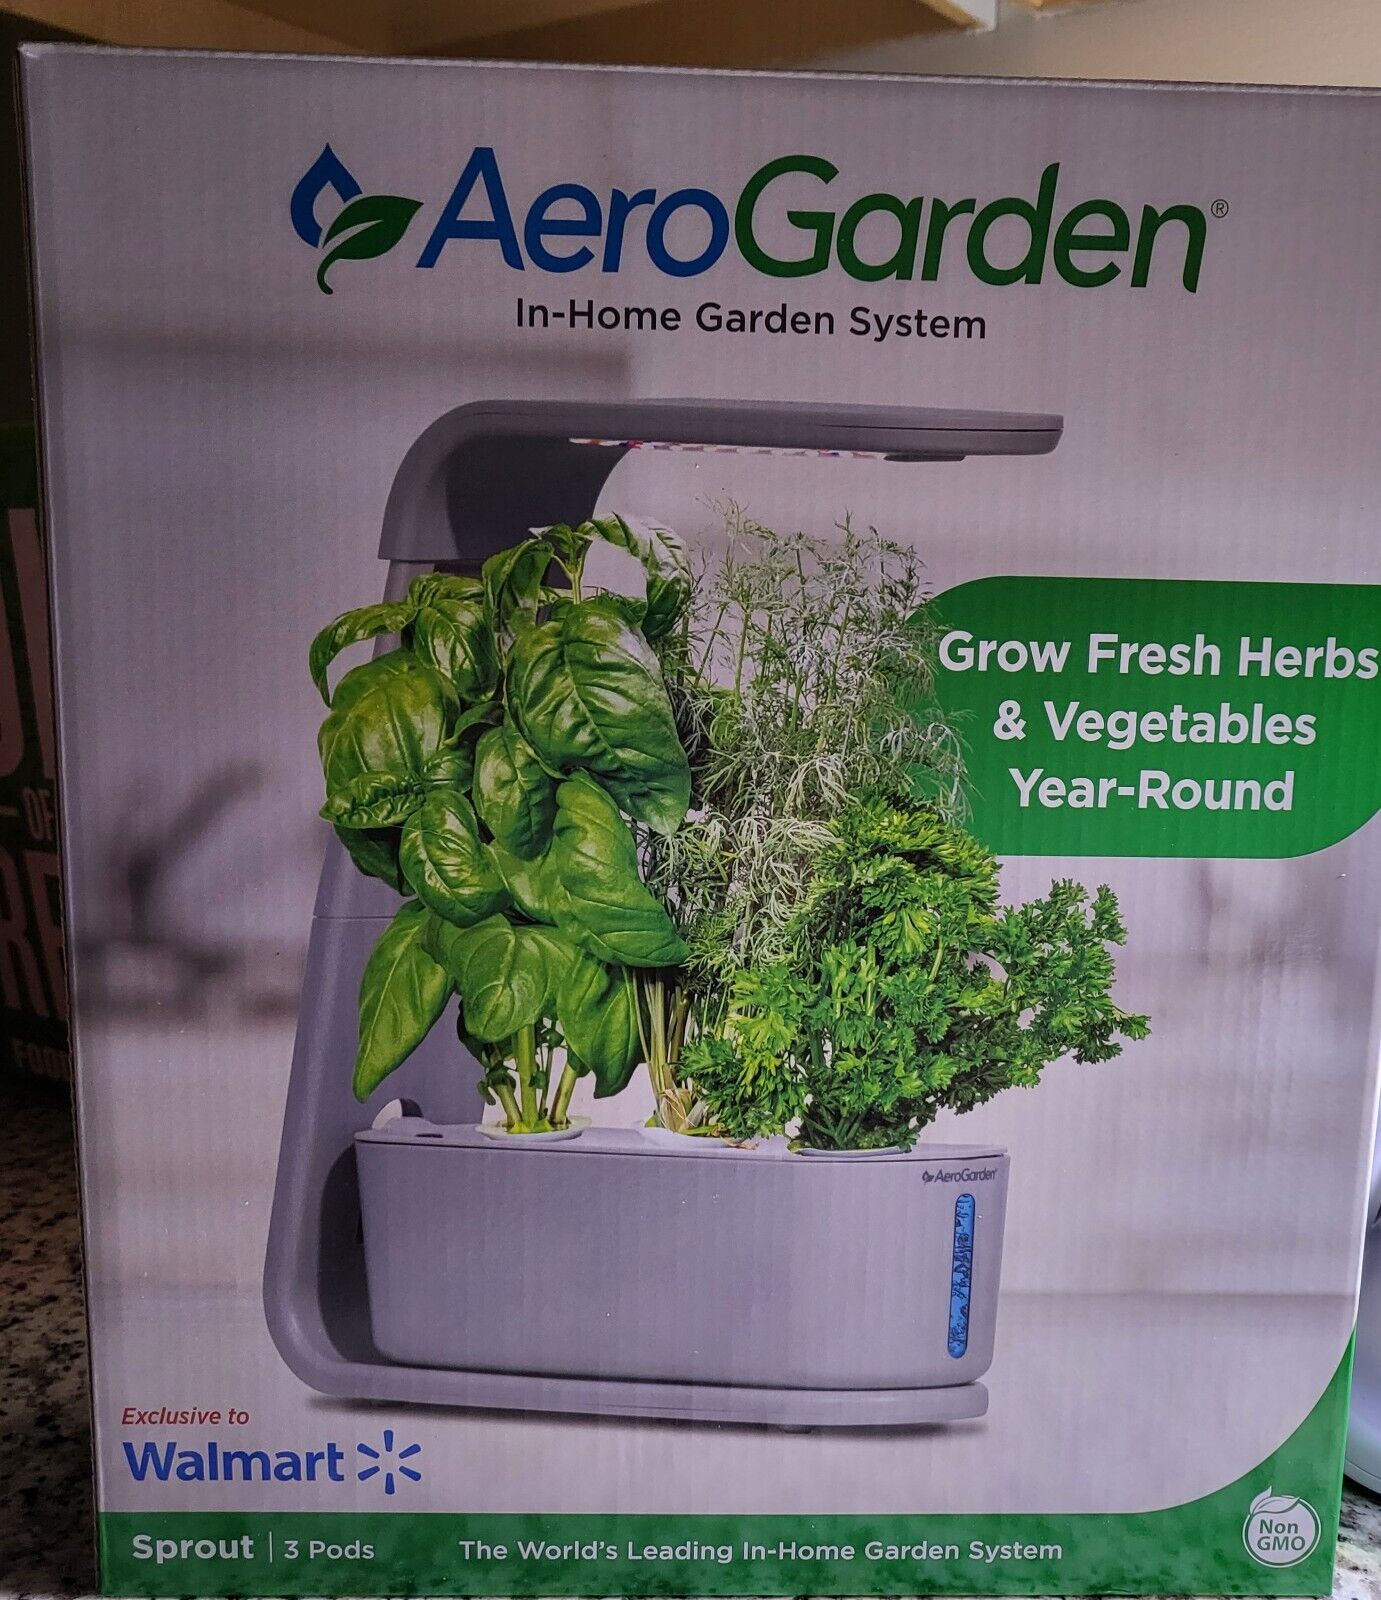 NEW LOT AeroGarden Sprout Seed System Indoor Garden, Jiffy Greenhouse Kits, MORE